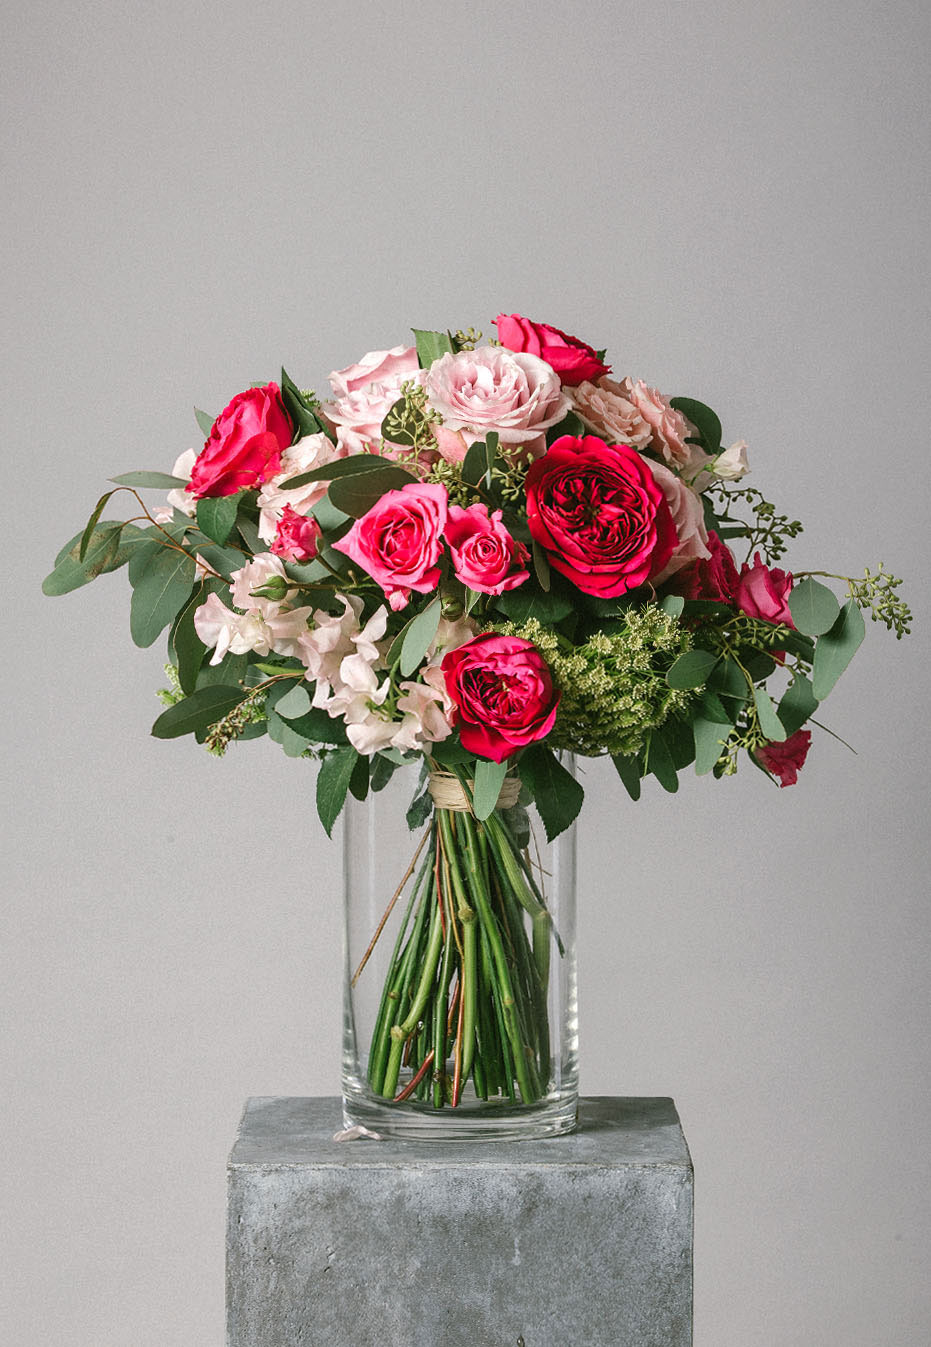 flower bouquet of garden rose and sweet pea by flannel flowers